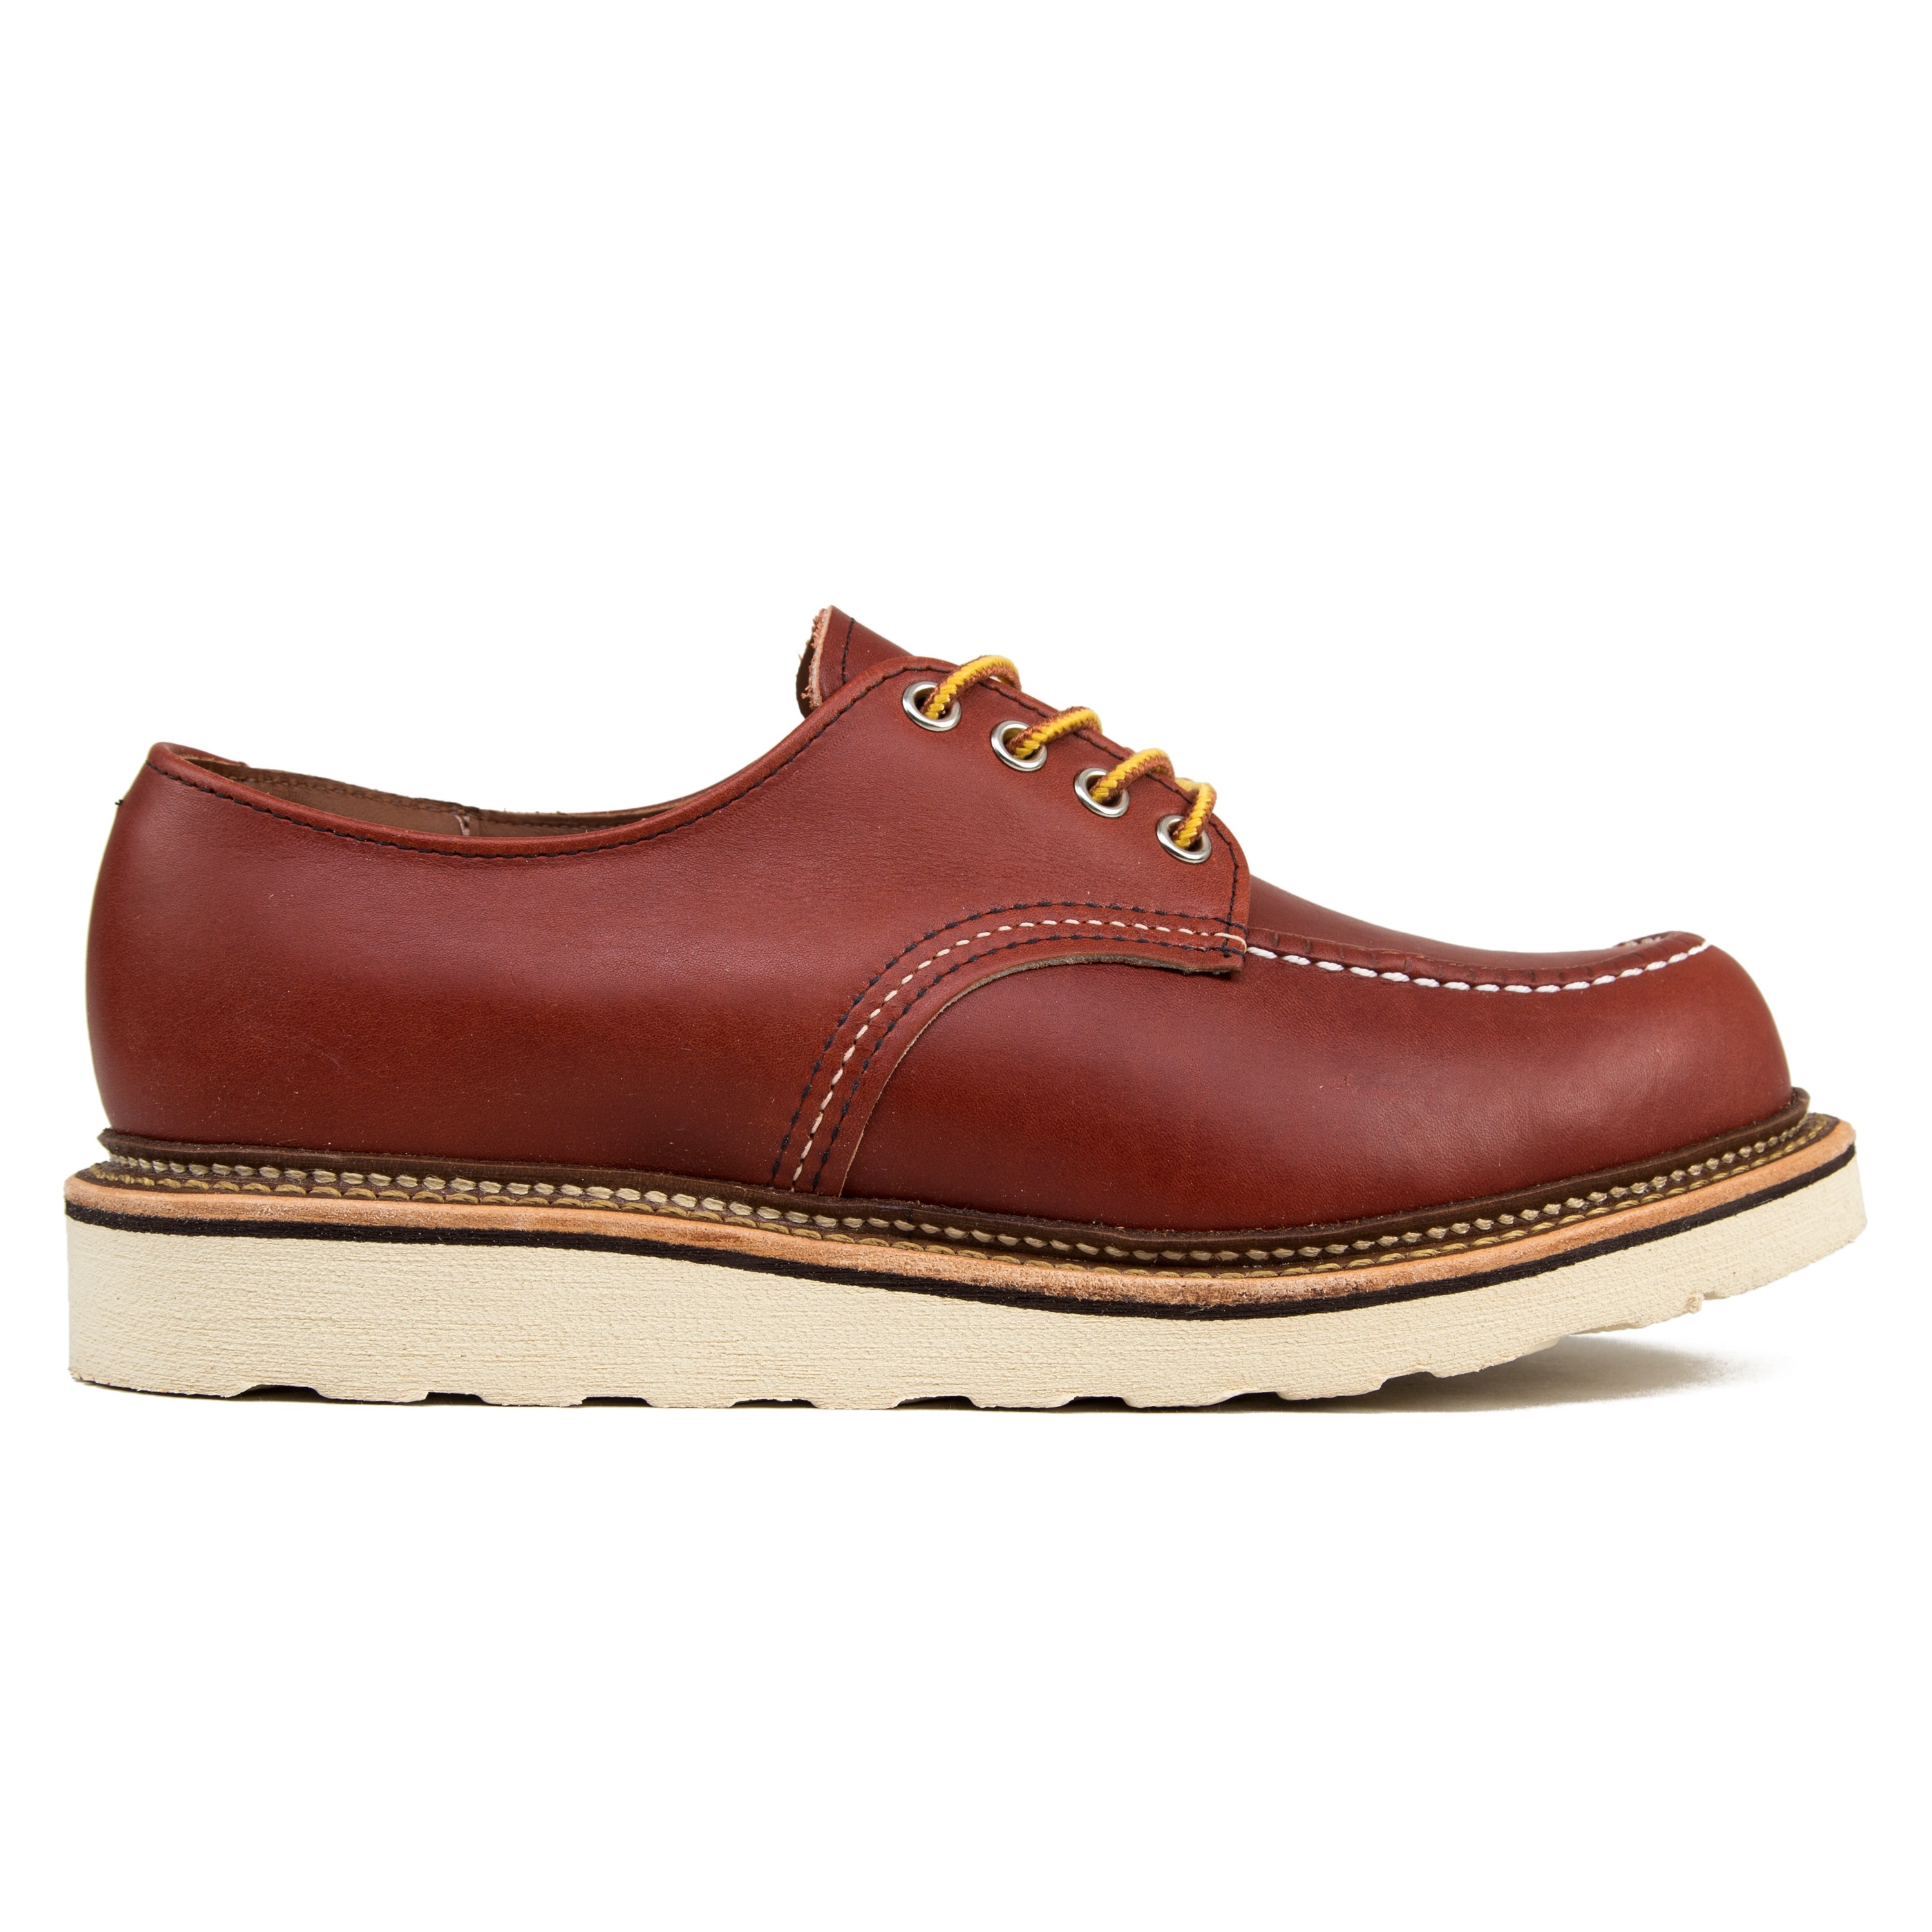 Red Wing 8103 Classic Oxford Moc Toe Shoes (Pro Russet